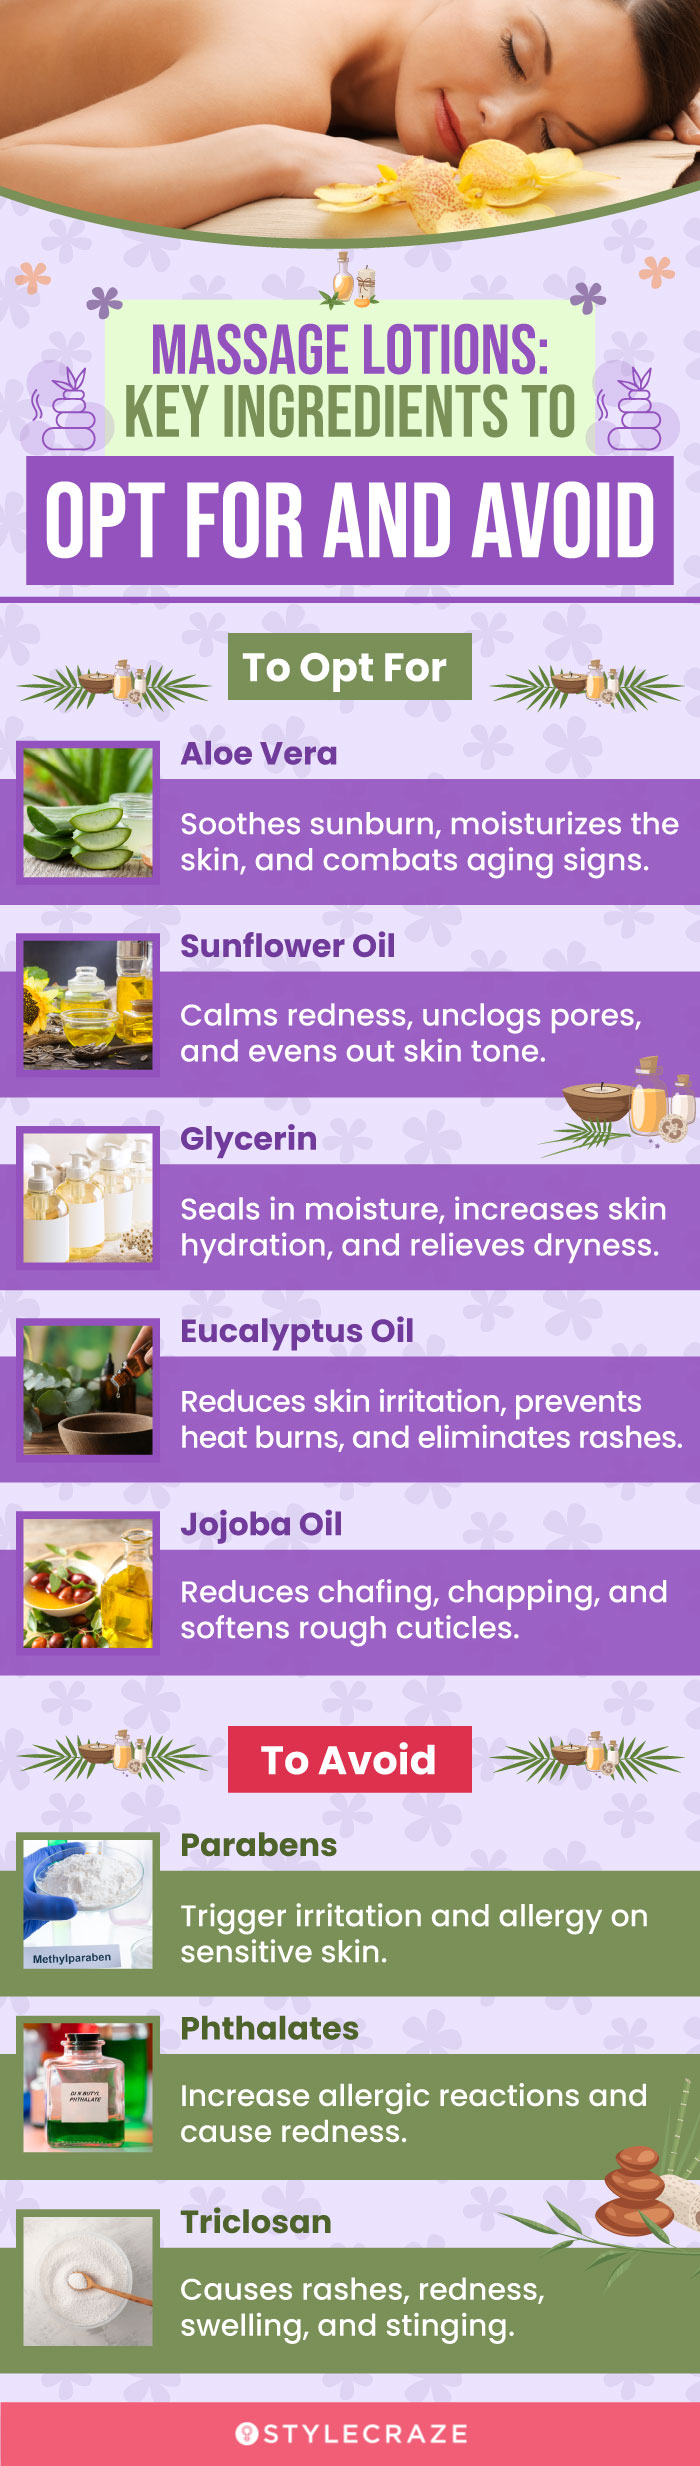 Massage Lotions: Key Ingredients To Opt For & Avoid